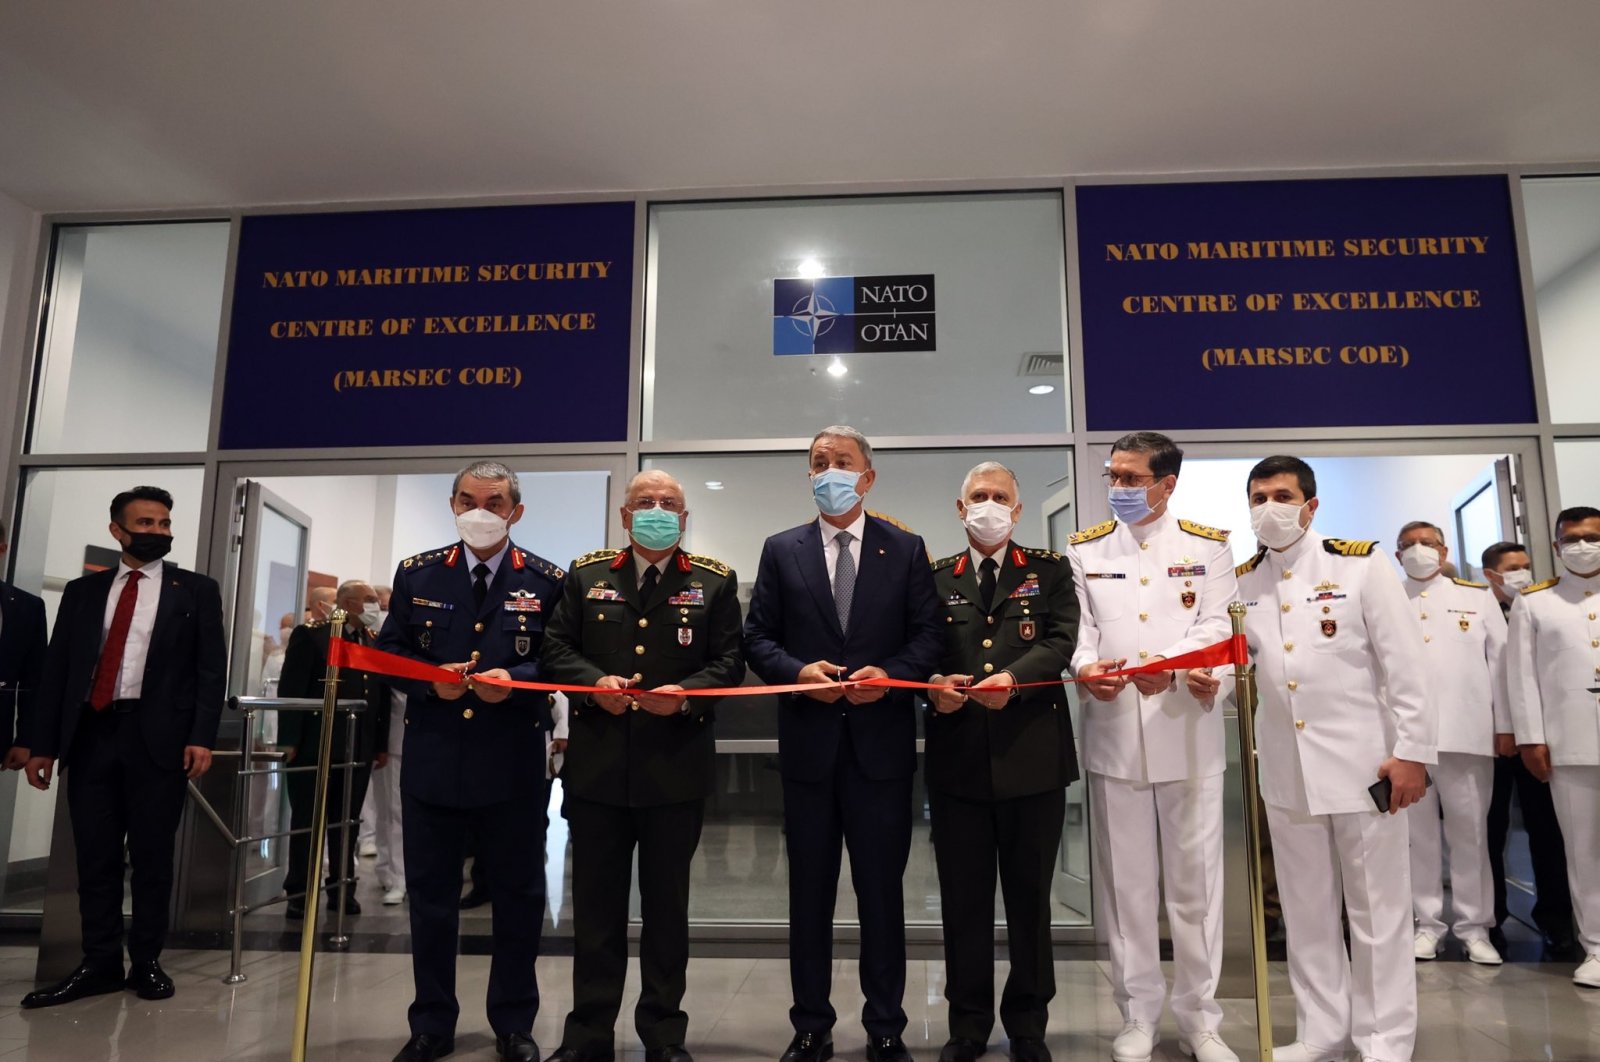 Turkish Defense Minister Hulusi Akar attends the opening ceremony of the NATO Maritime Security Center of Excellence in Istanbul, Turkey, June 11, 2021. (DHA Photo)